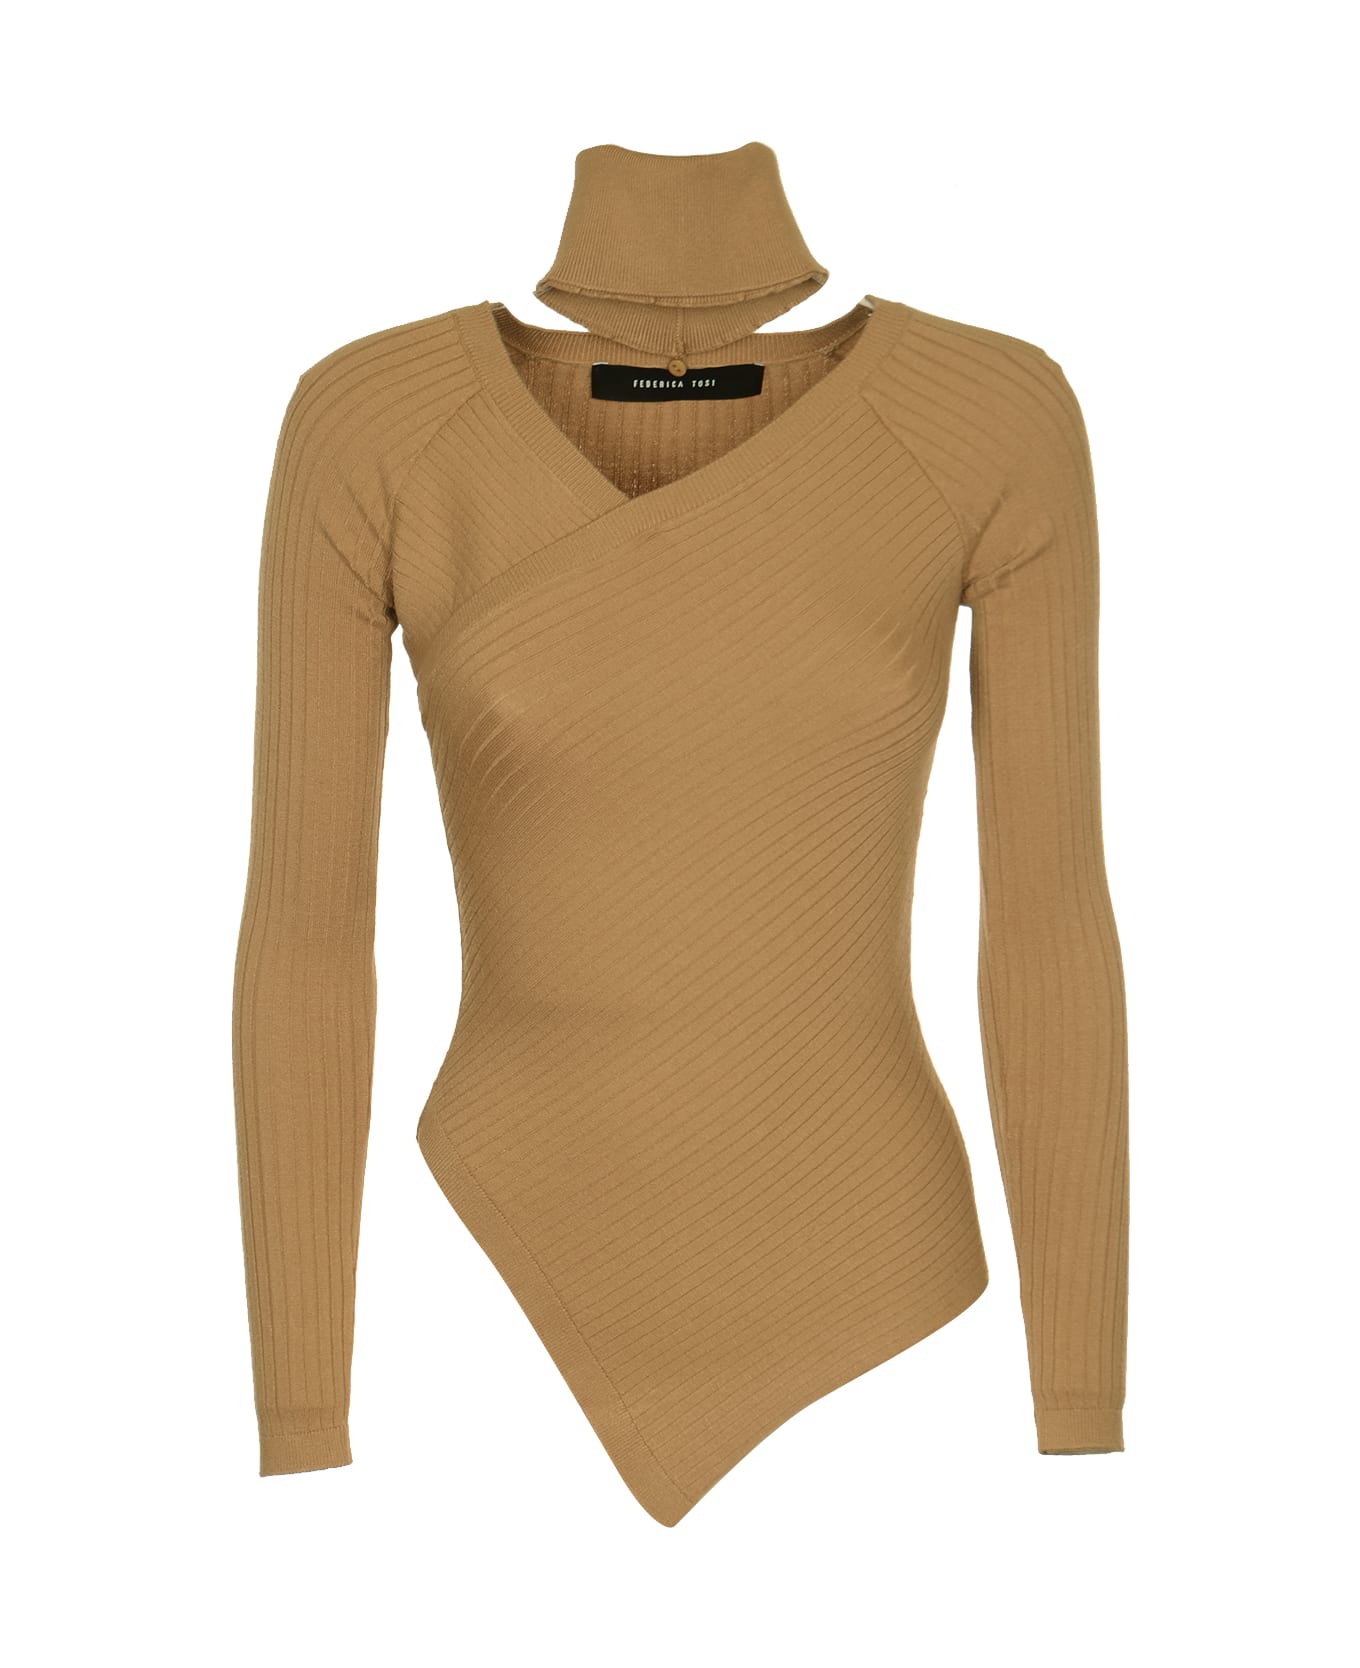 Federica Tosi Ribbed Bodysuit - Brown ボディスーツ